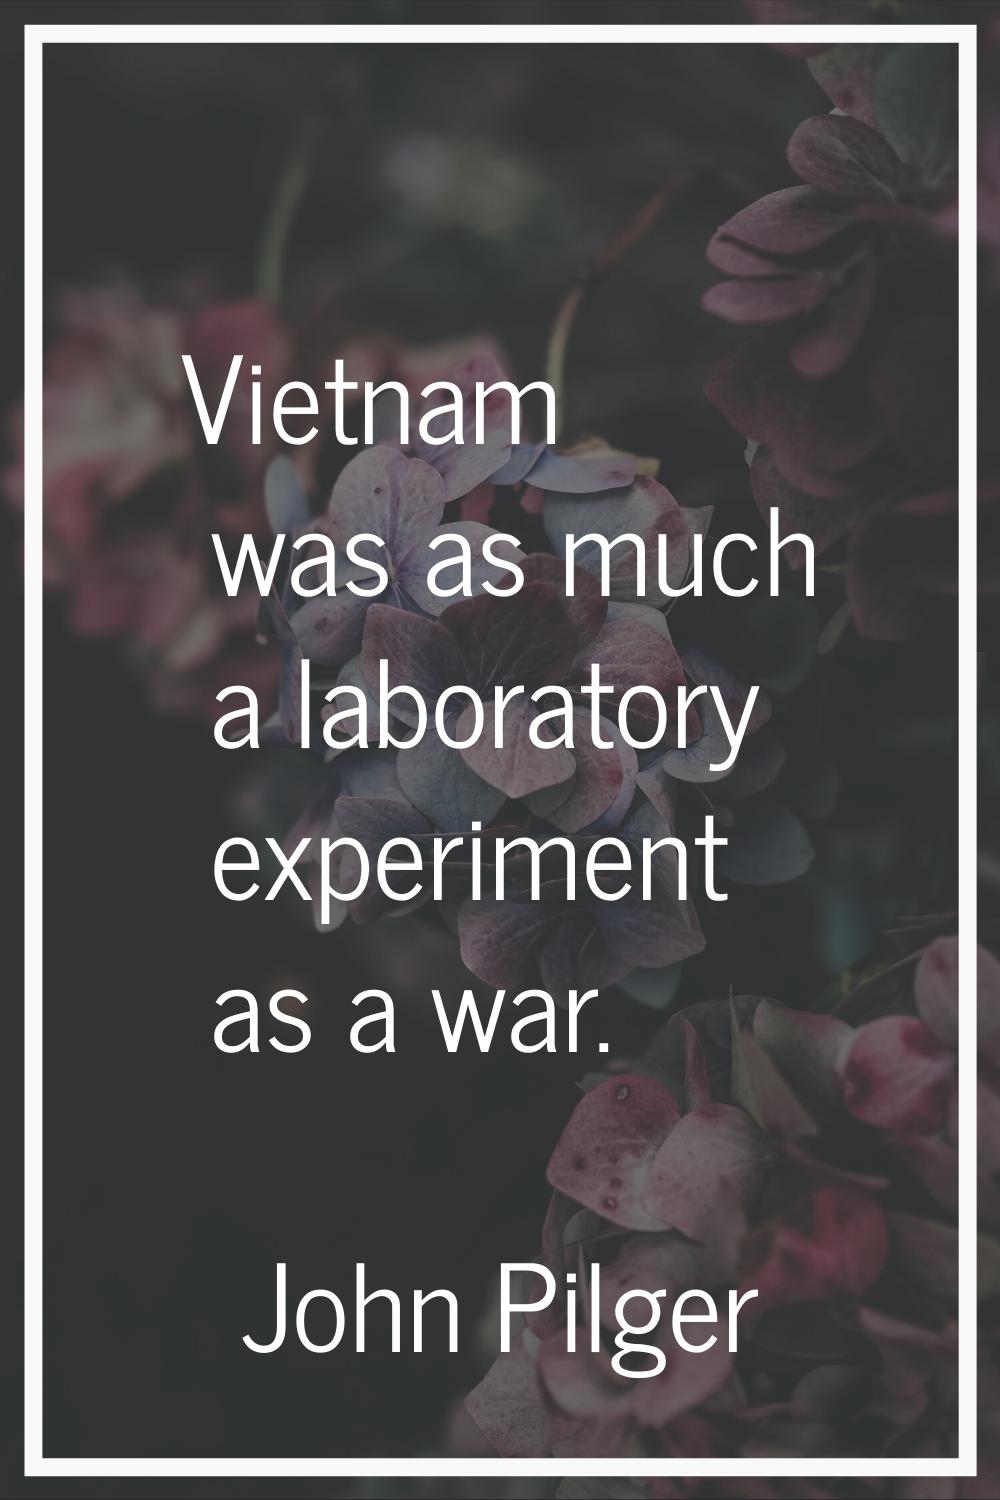 Vietnam was as much a laboratory experiment as a war.